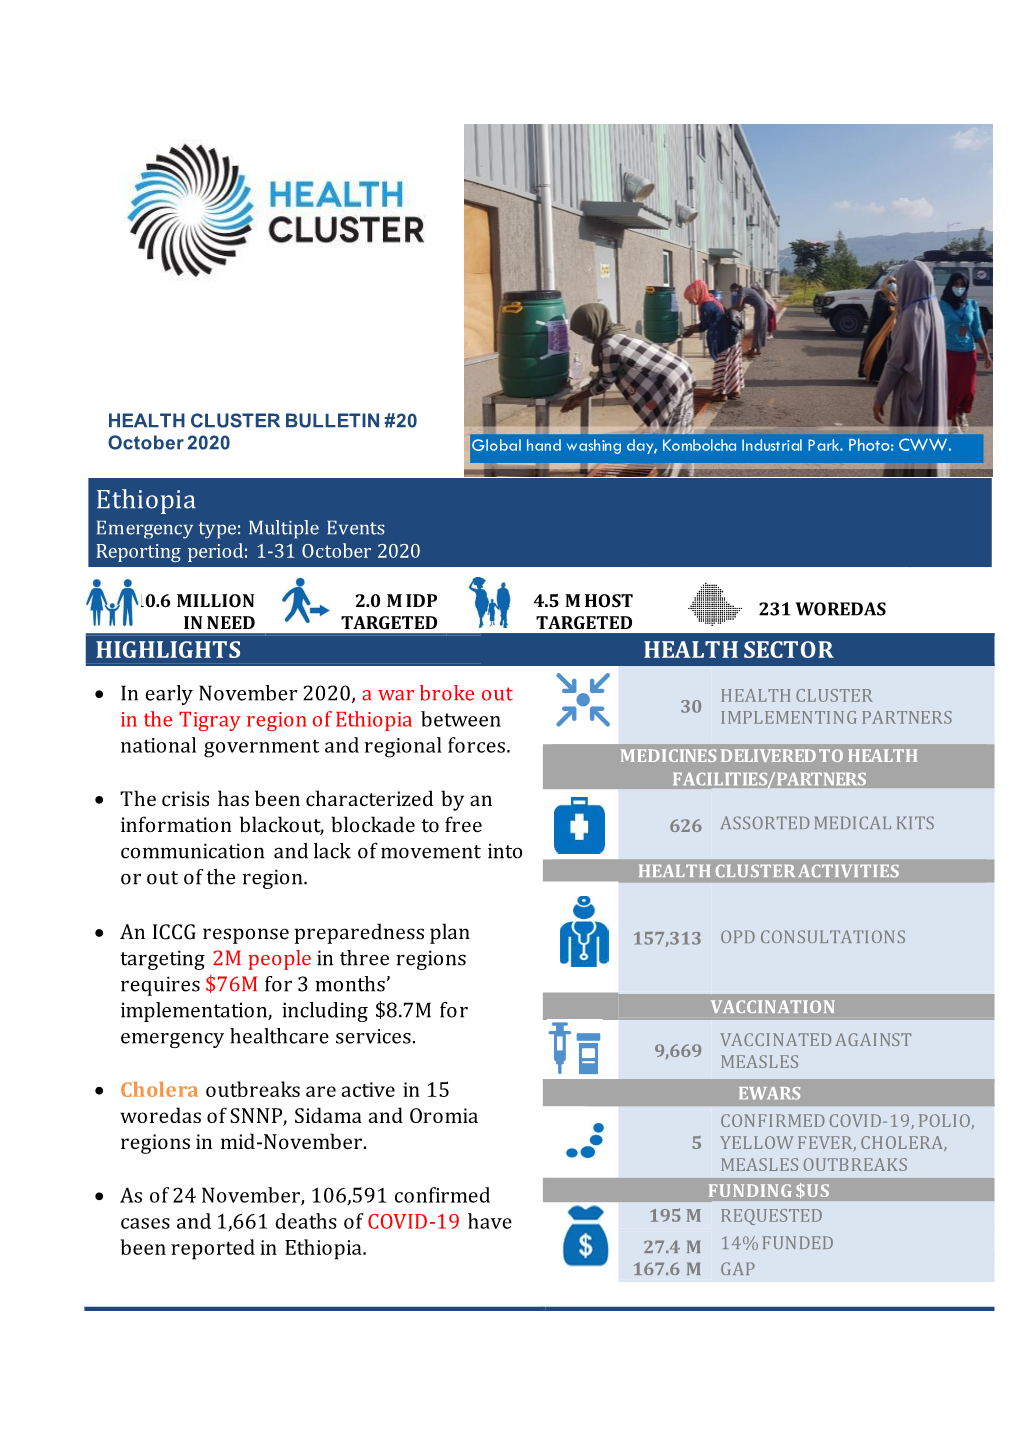 Ethiopia Emergency Type: Multiple Events Reporting Period: 1-31 October 2020